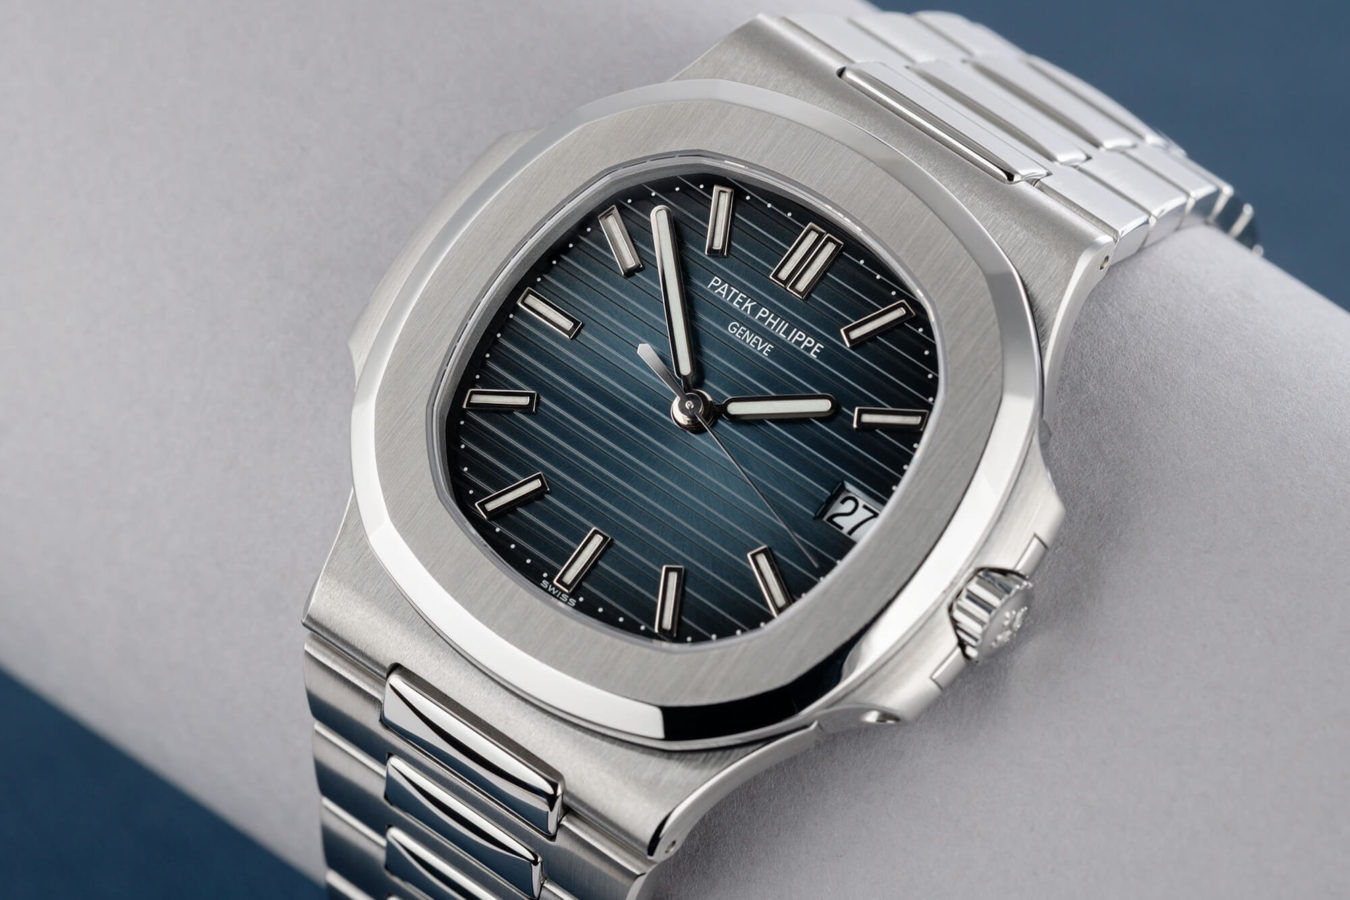 Patek Philippe have announced their first-ever Nautilus 5711 NFT